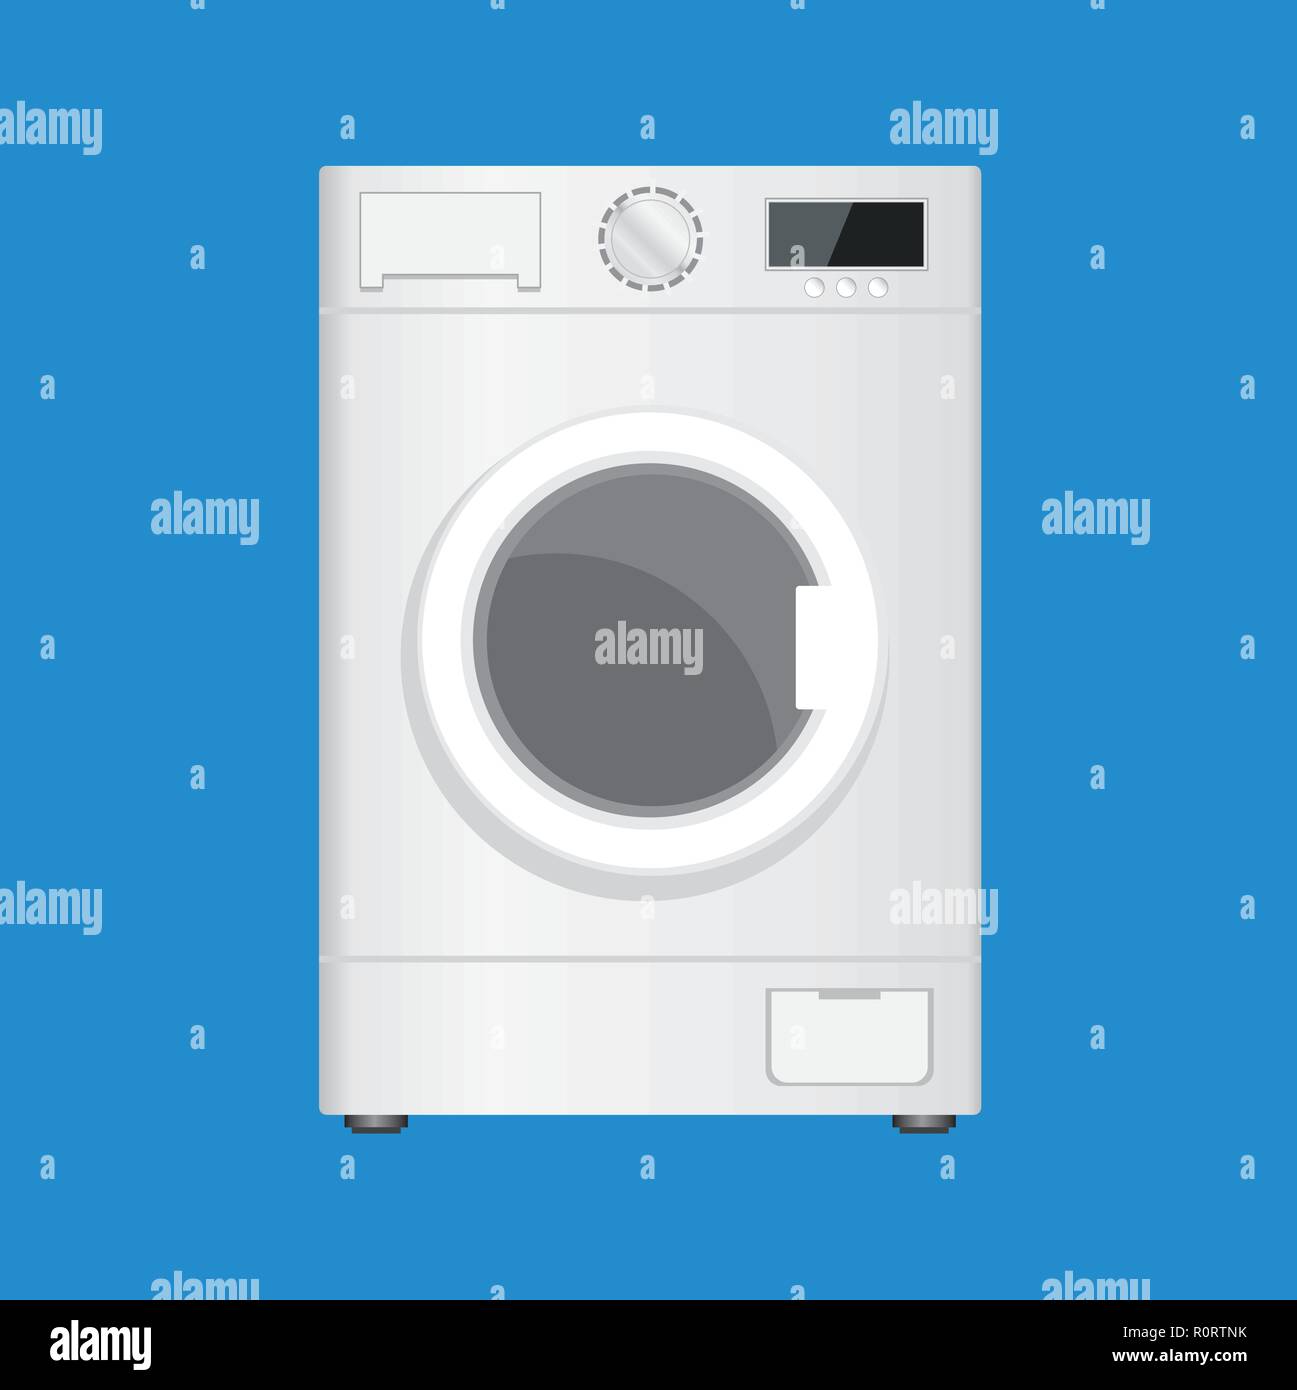 Washing machine isolated on blue background. Front view. Modern, realistic vector illustration of home appliances. Stock Vector